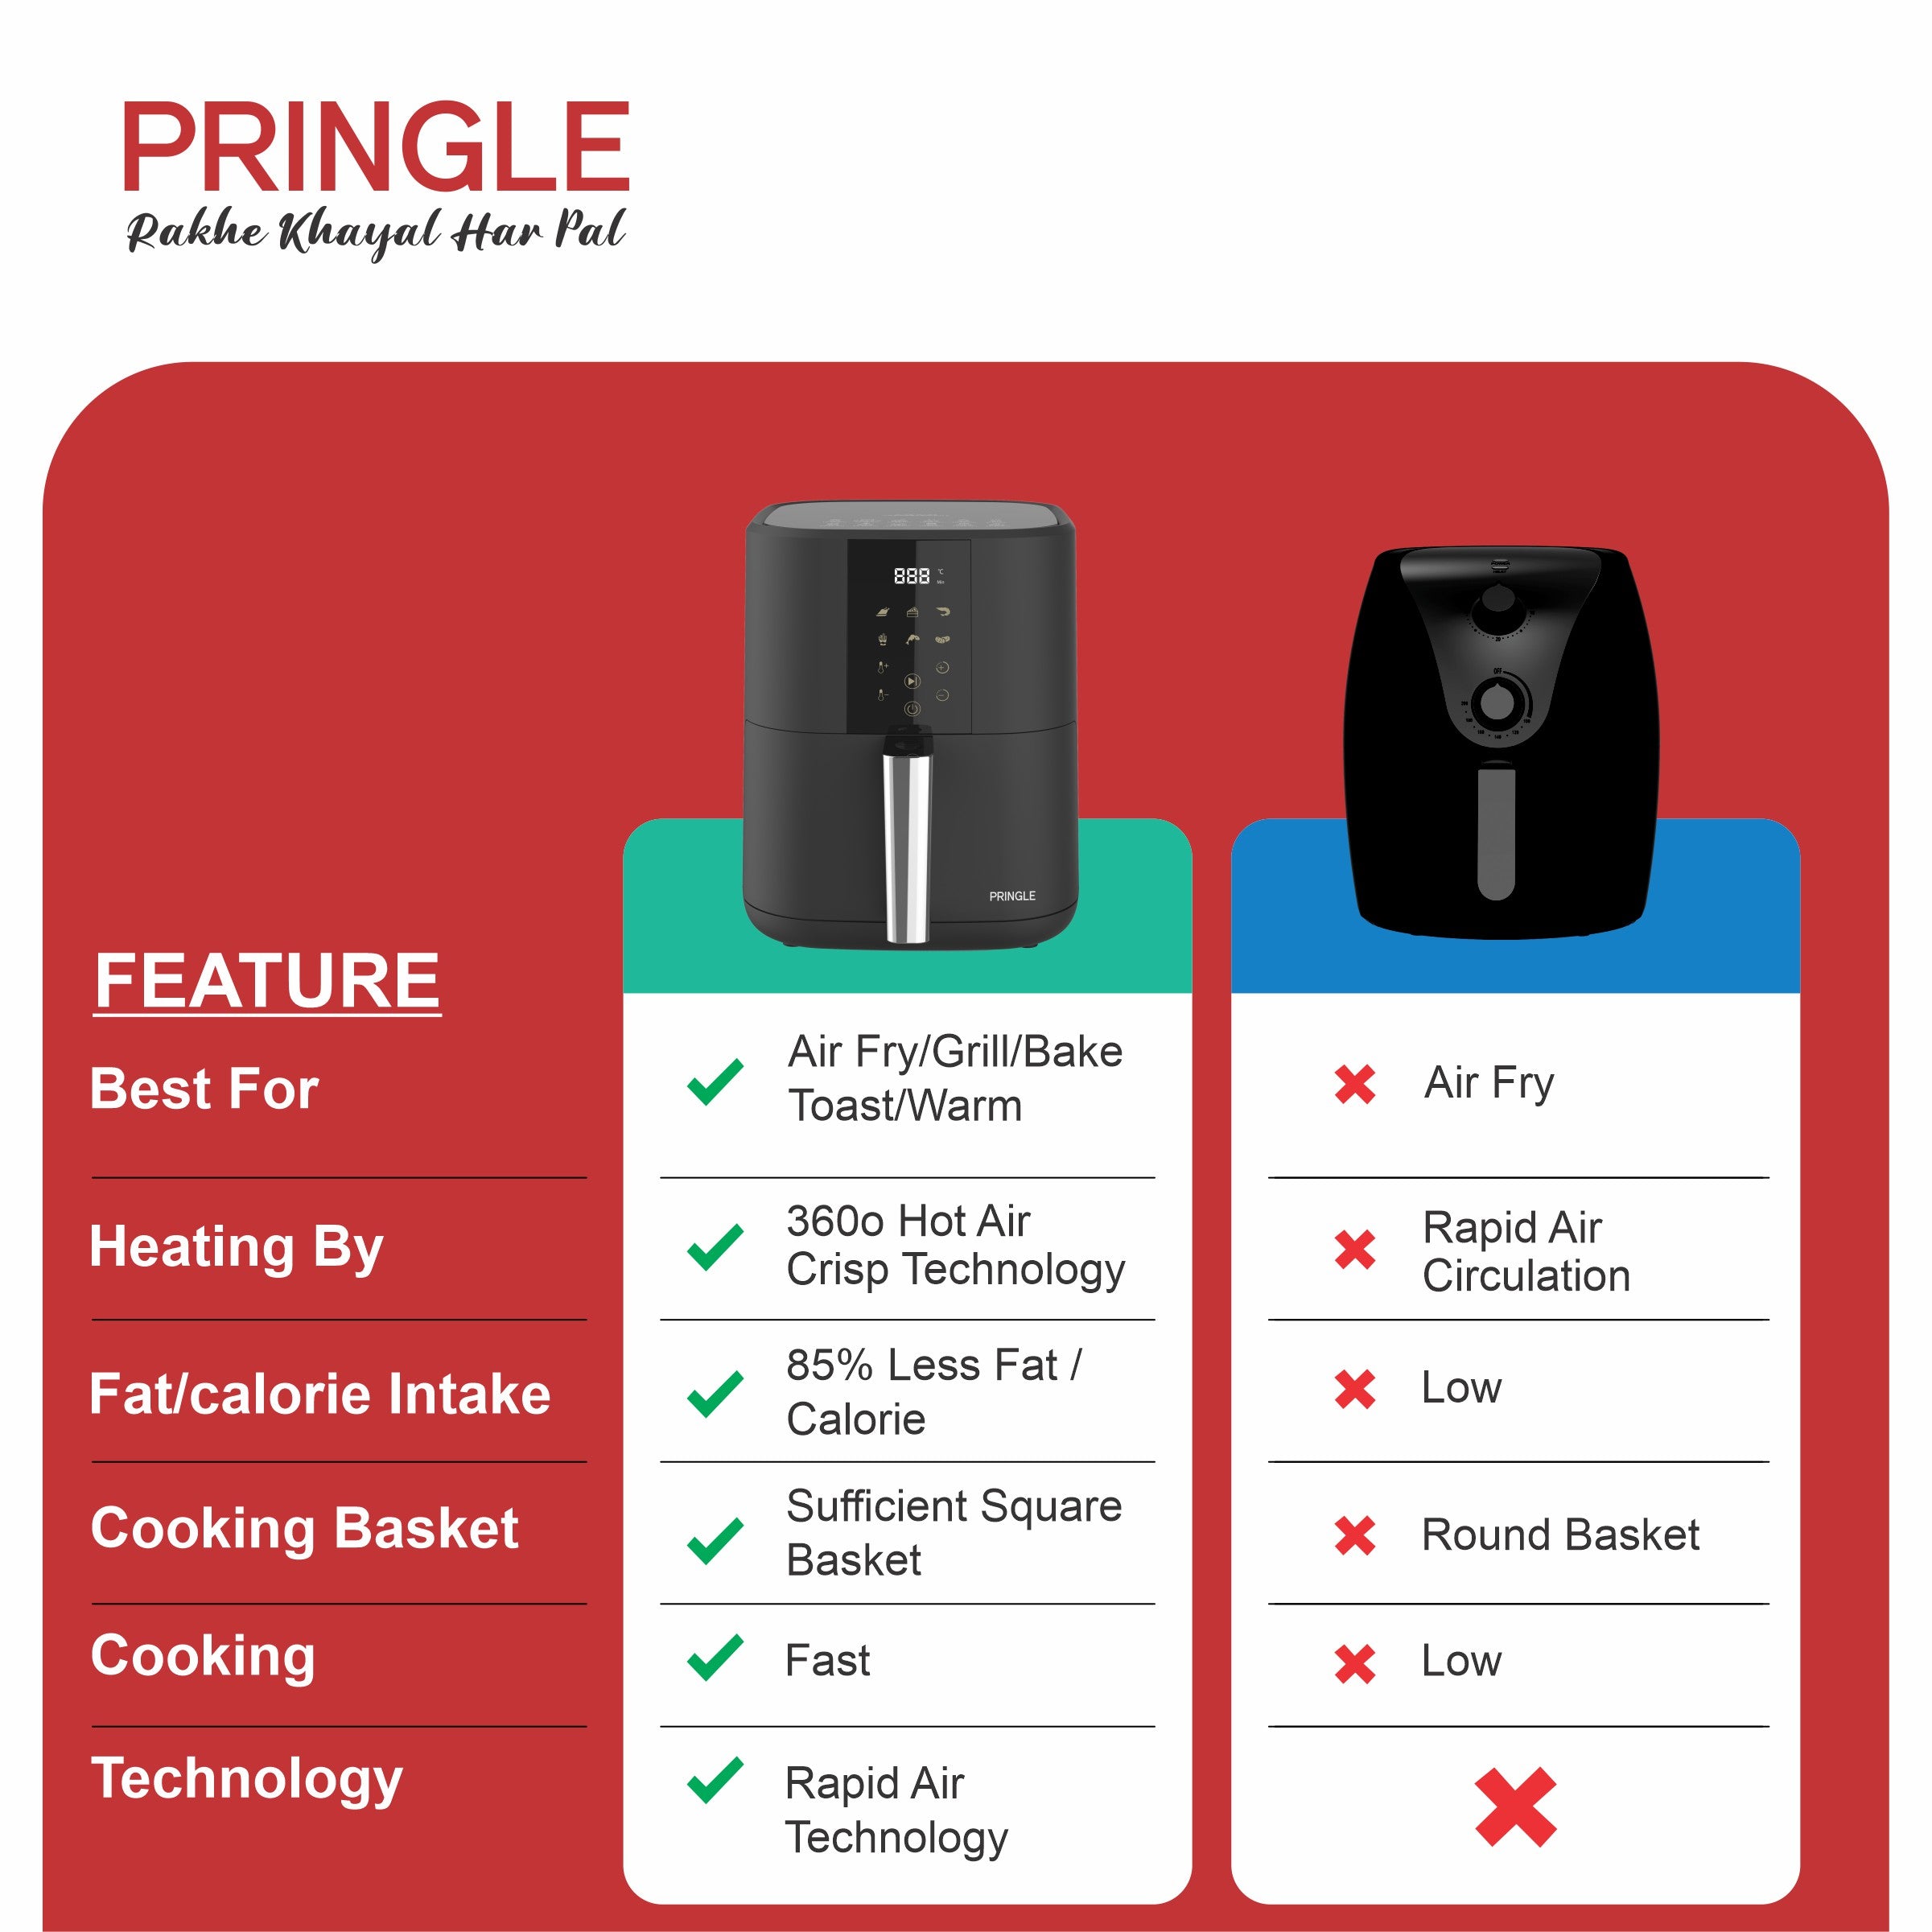 Pringle AF1406 Digital Air Fryer, 360° High Speed Air Circulation Technology 1350 W with Non-Stick 4.2 L Basket-Green